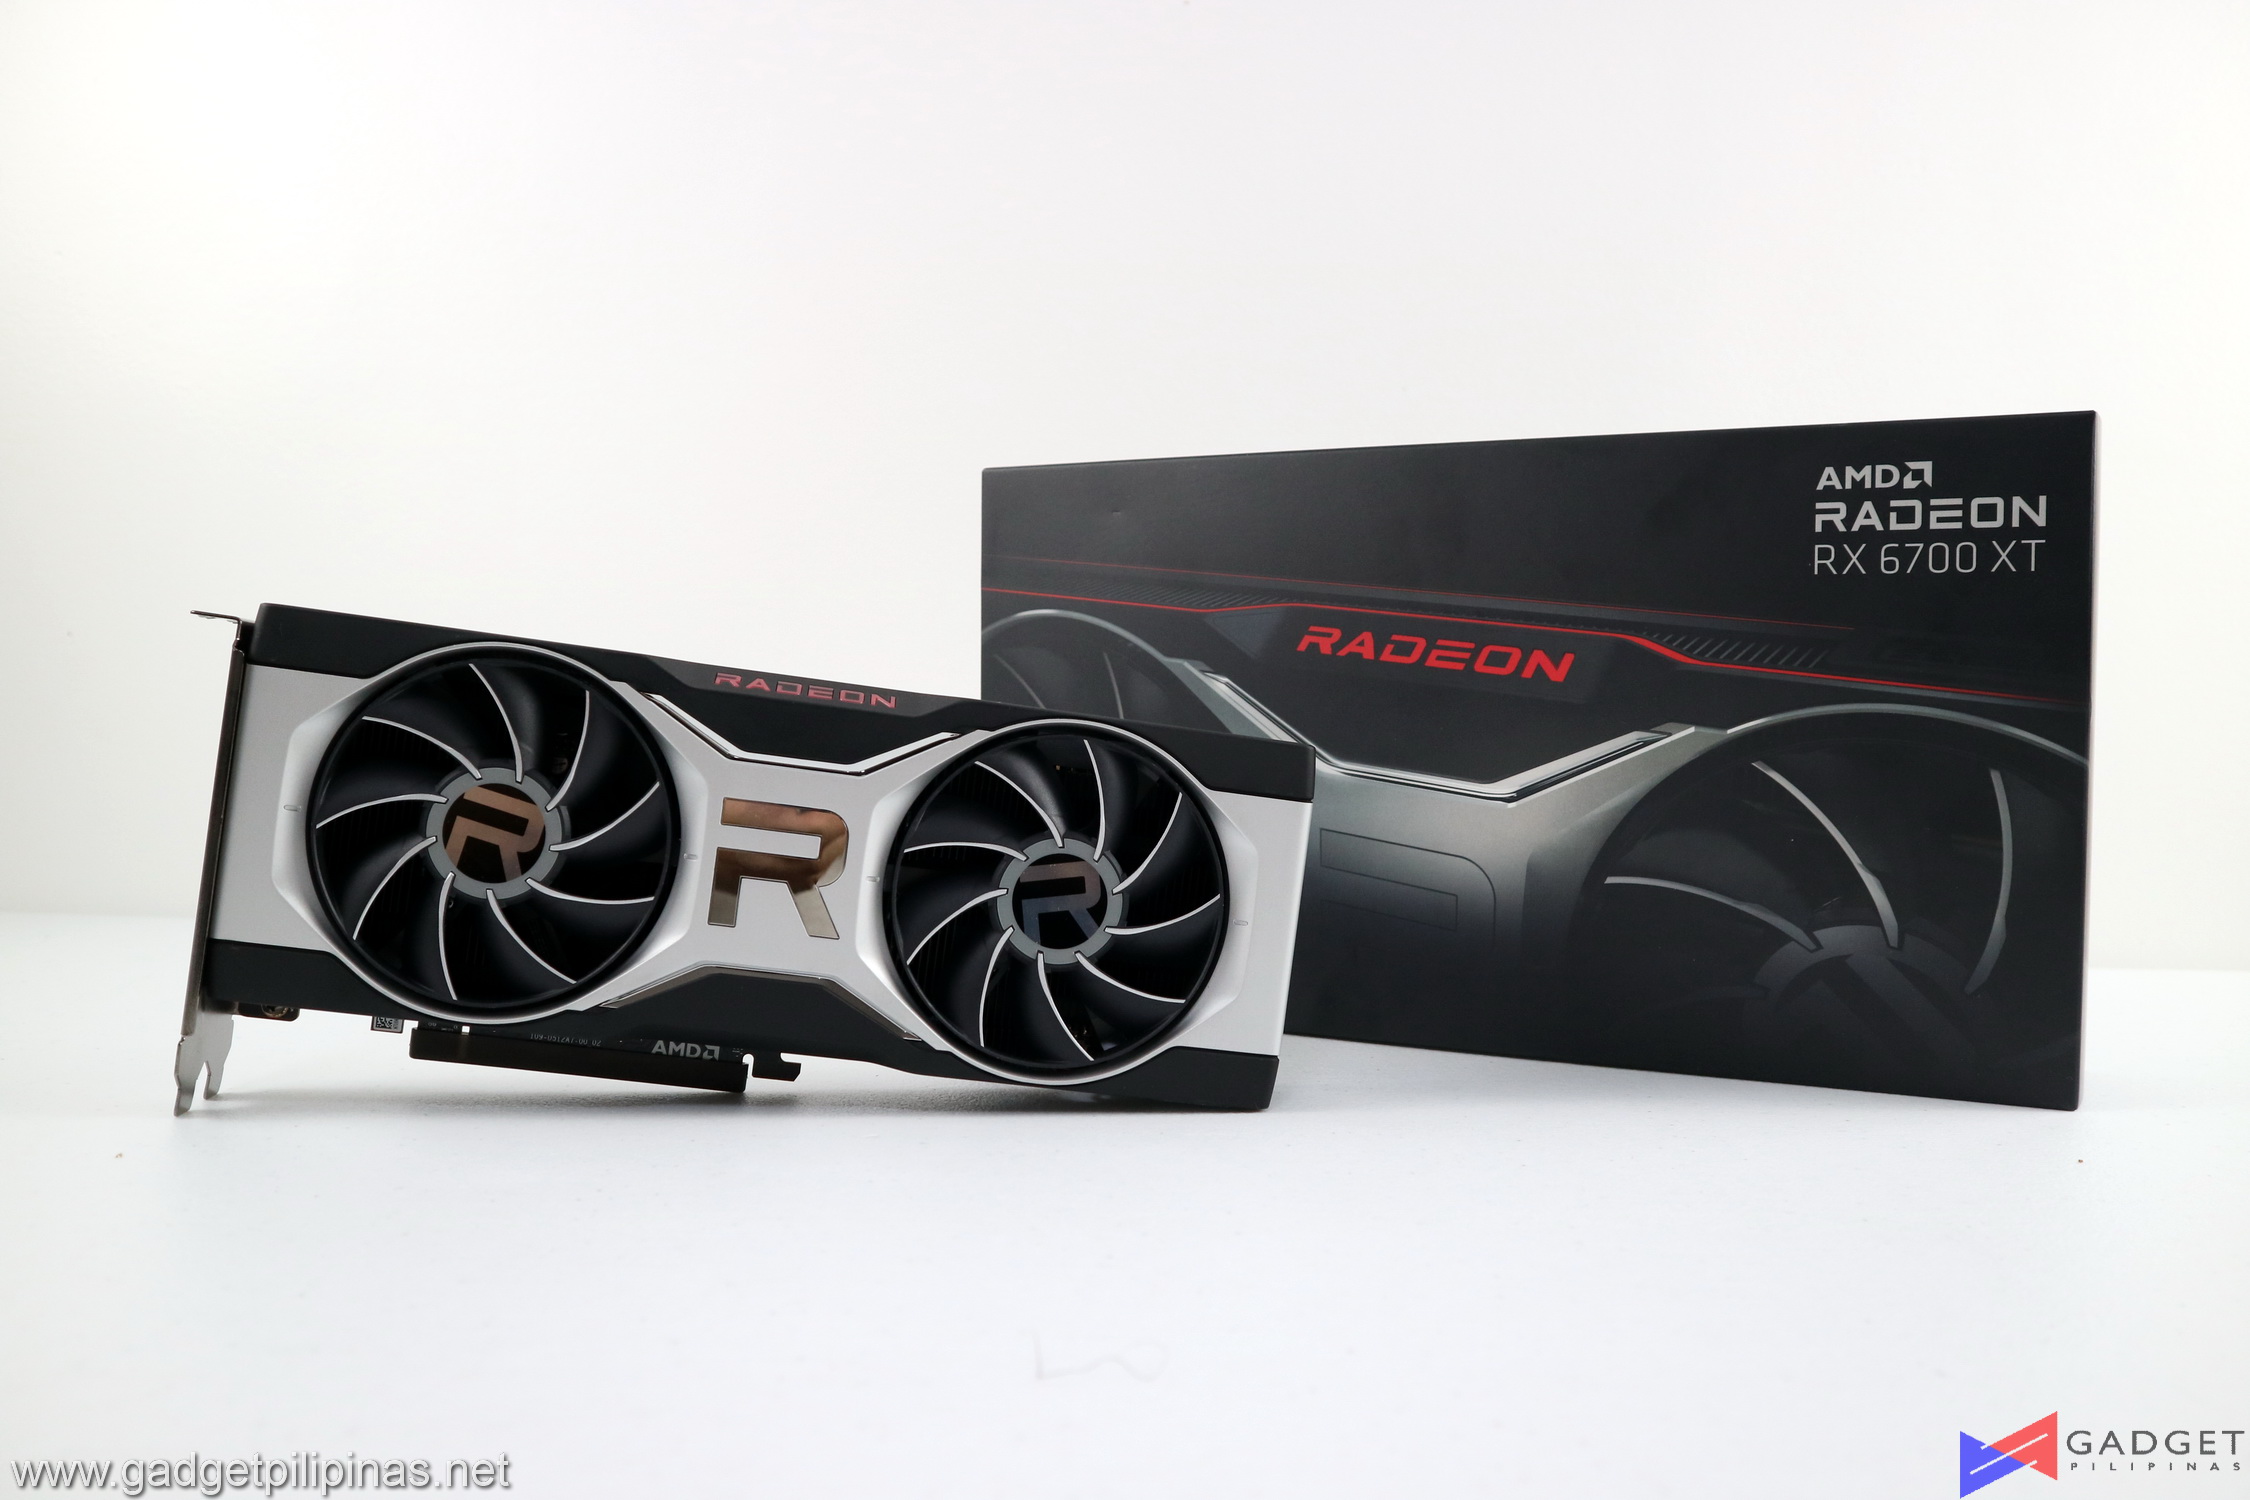 AMD Radeon RX 6700 XT Graphics Card Review – A Great 1440p Alternative